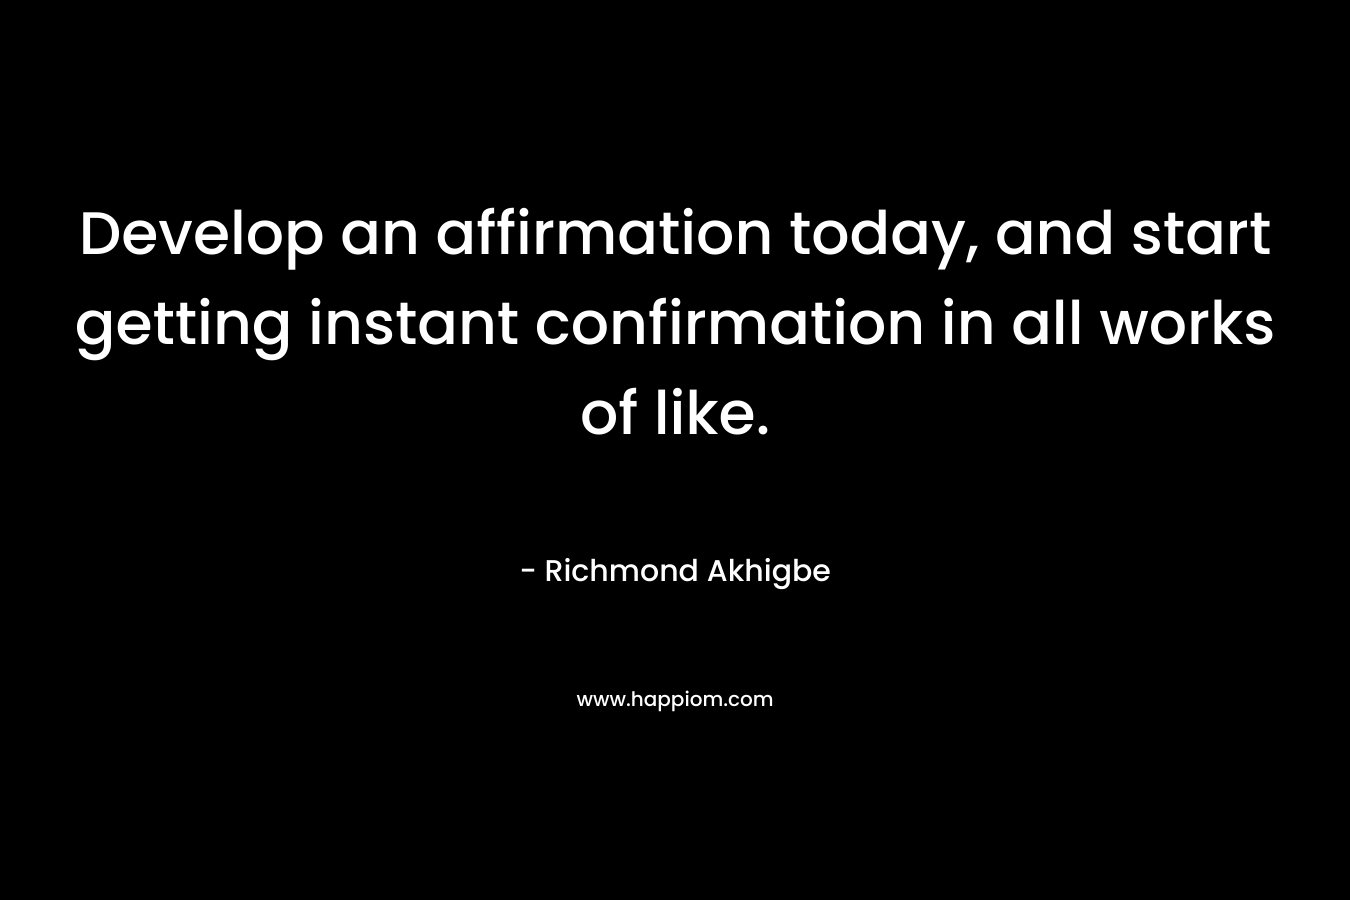 Develop an affirmation today, and start getting instant confirmation in all works of like. – Richmond Akhigbe